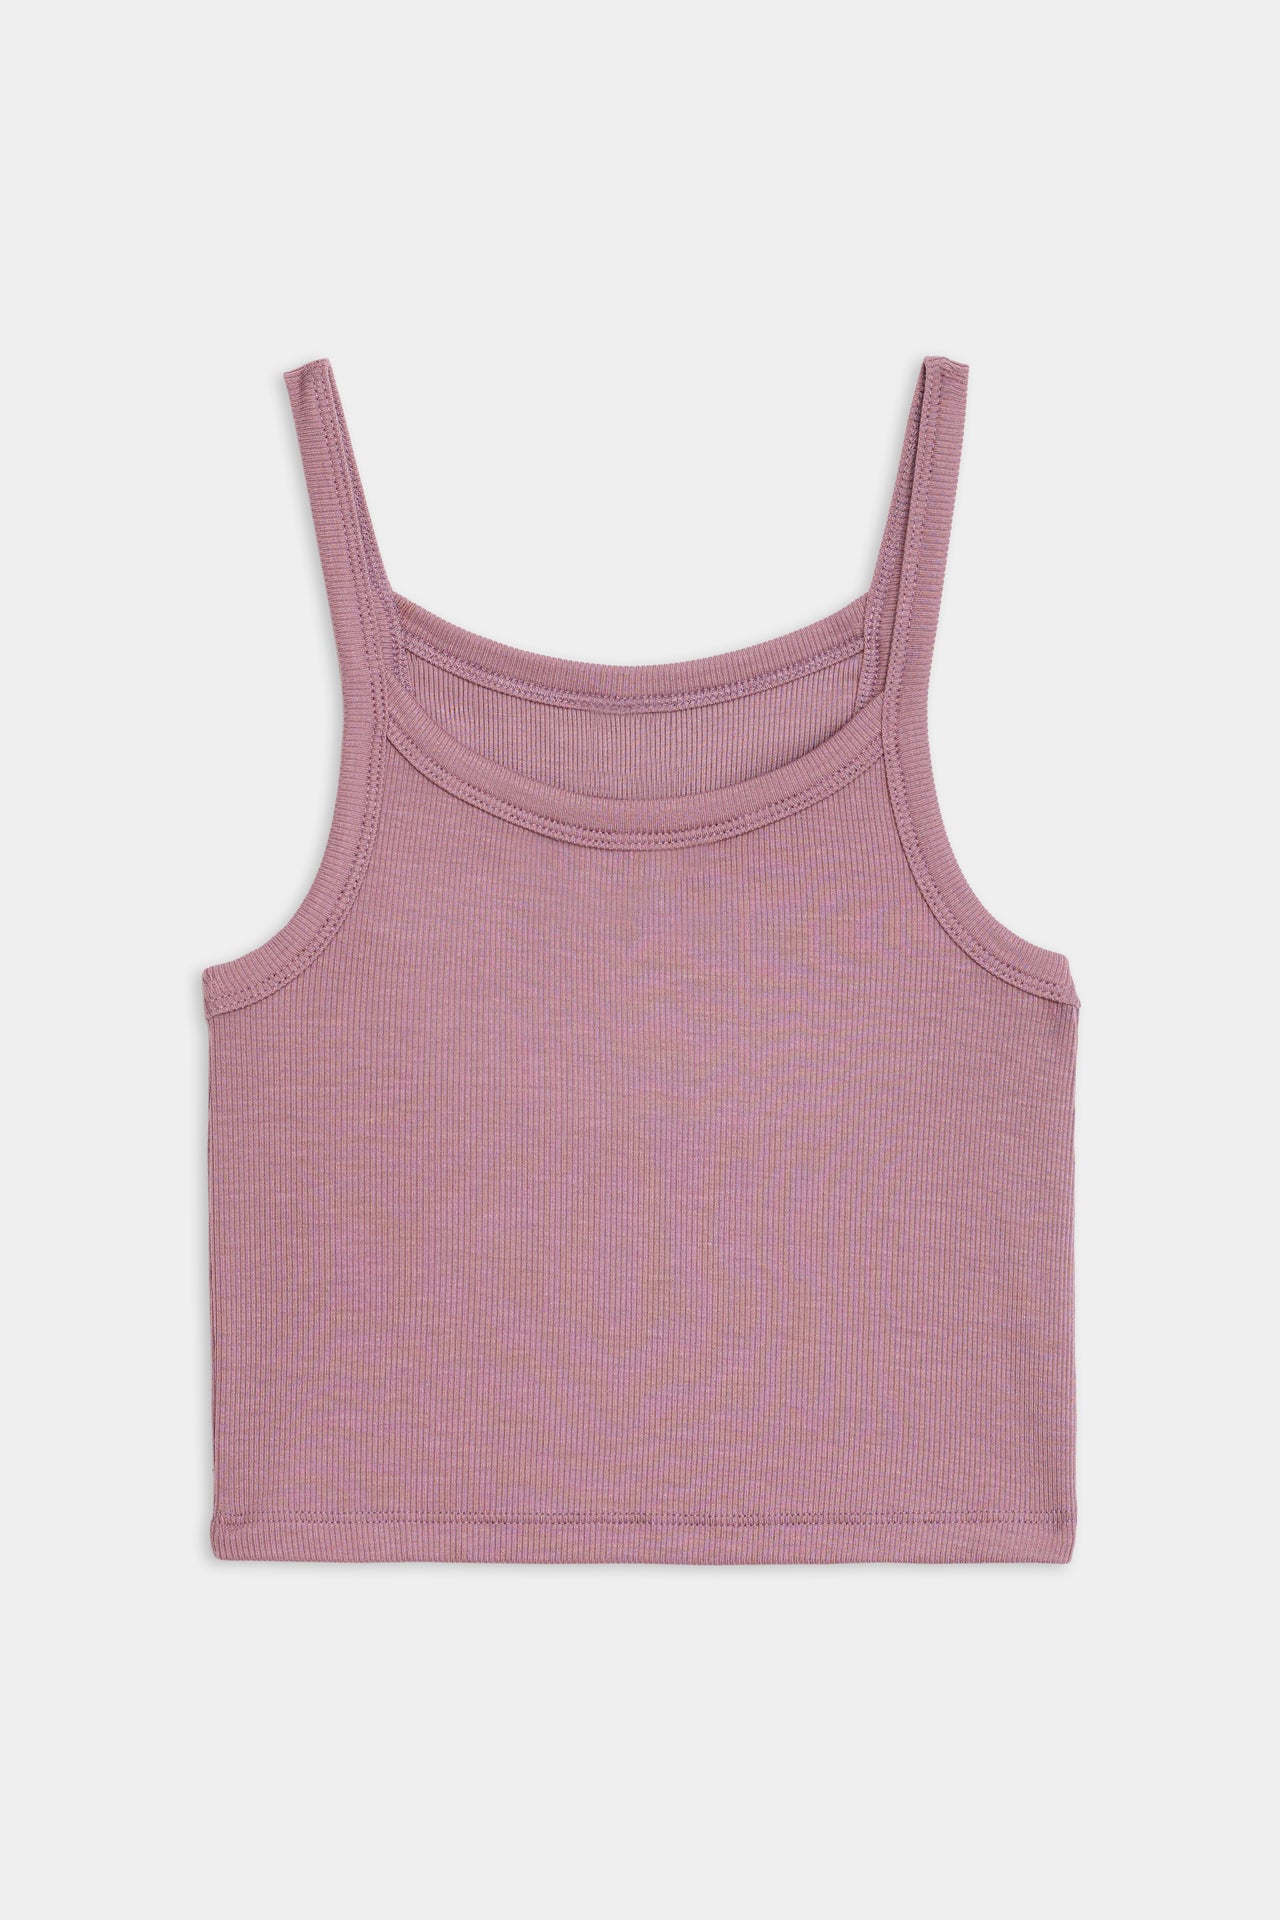 Flat view of light pink ribbed square neck cropped tank top 